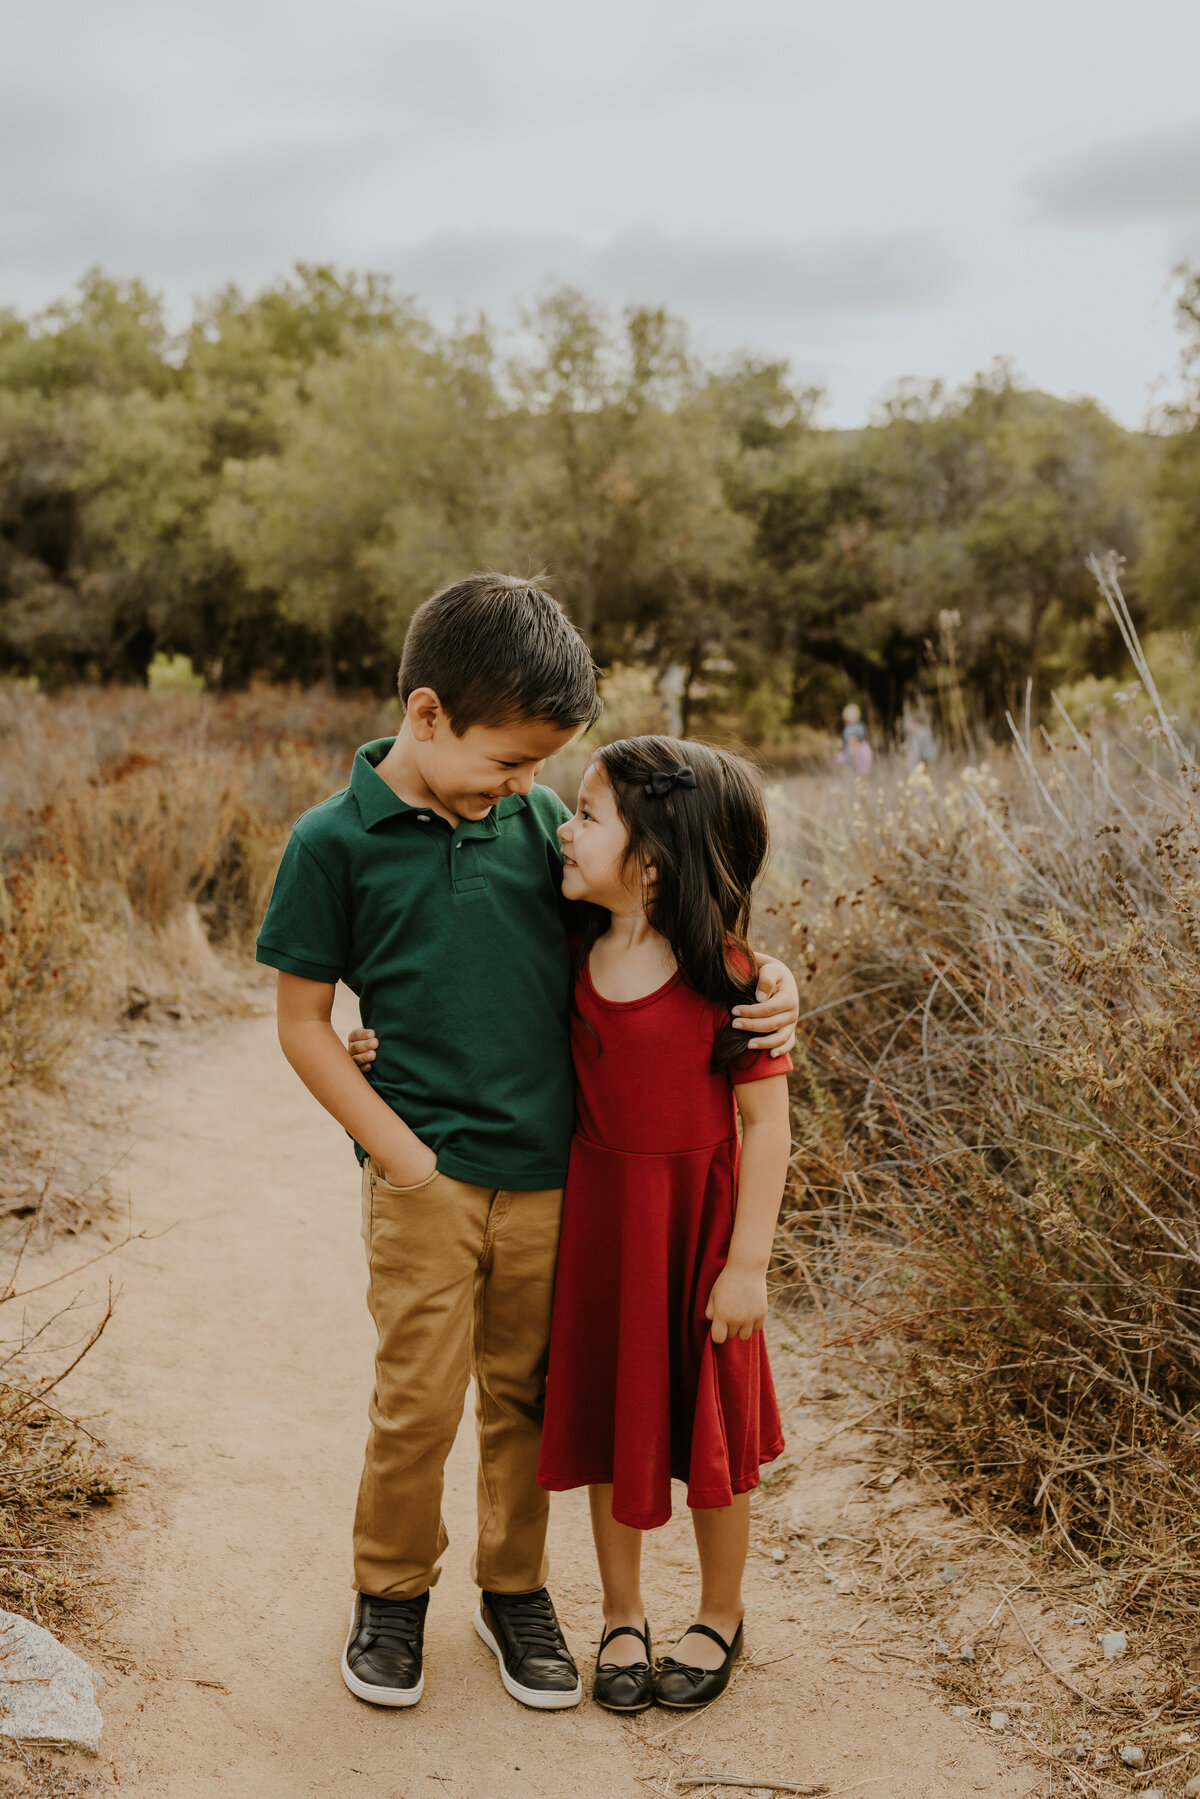 Kids in family photograph from photoshoot Temecula, California Wedding and lifestyle photographer Yescphotography